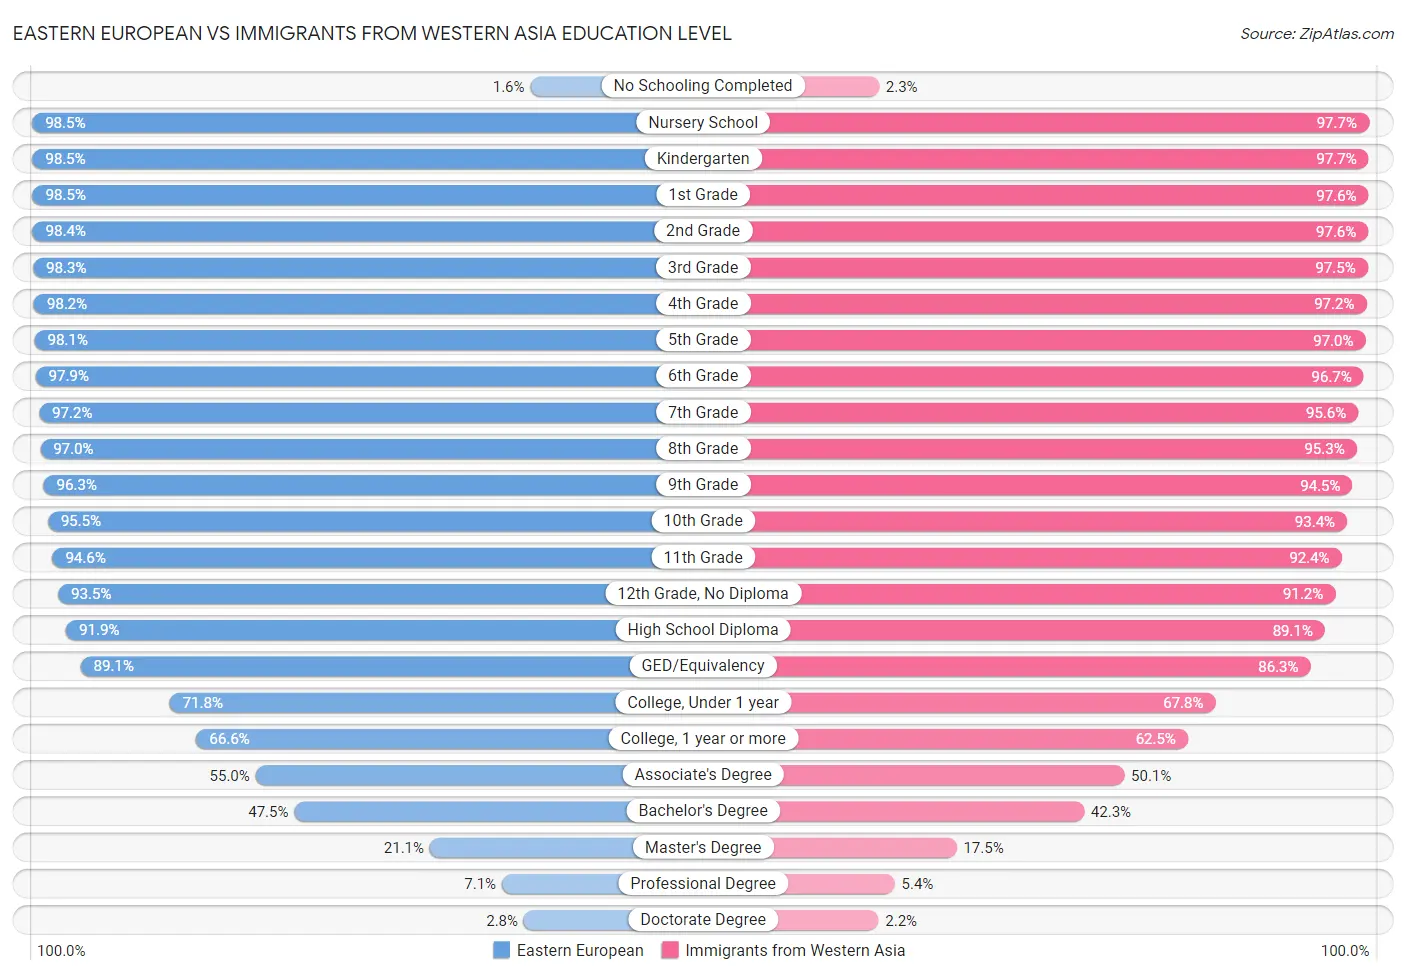 Eastern European vs Immigrants from Western Asia Education Level